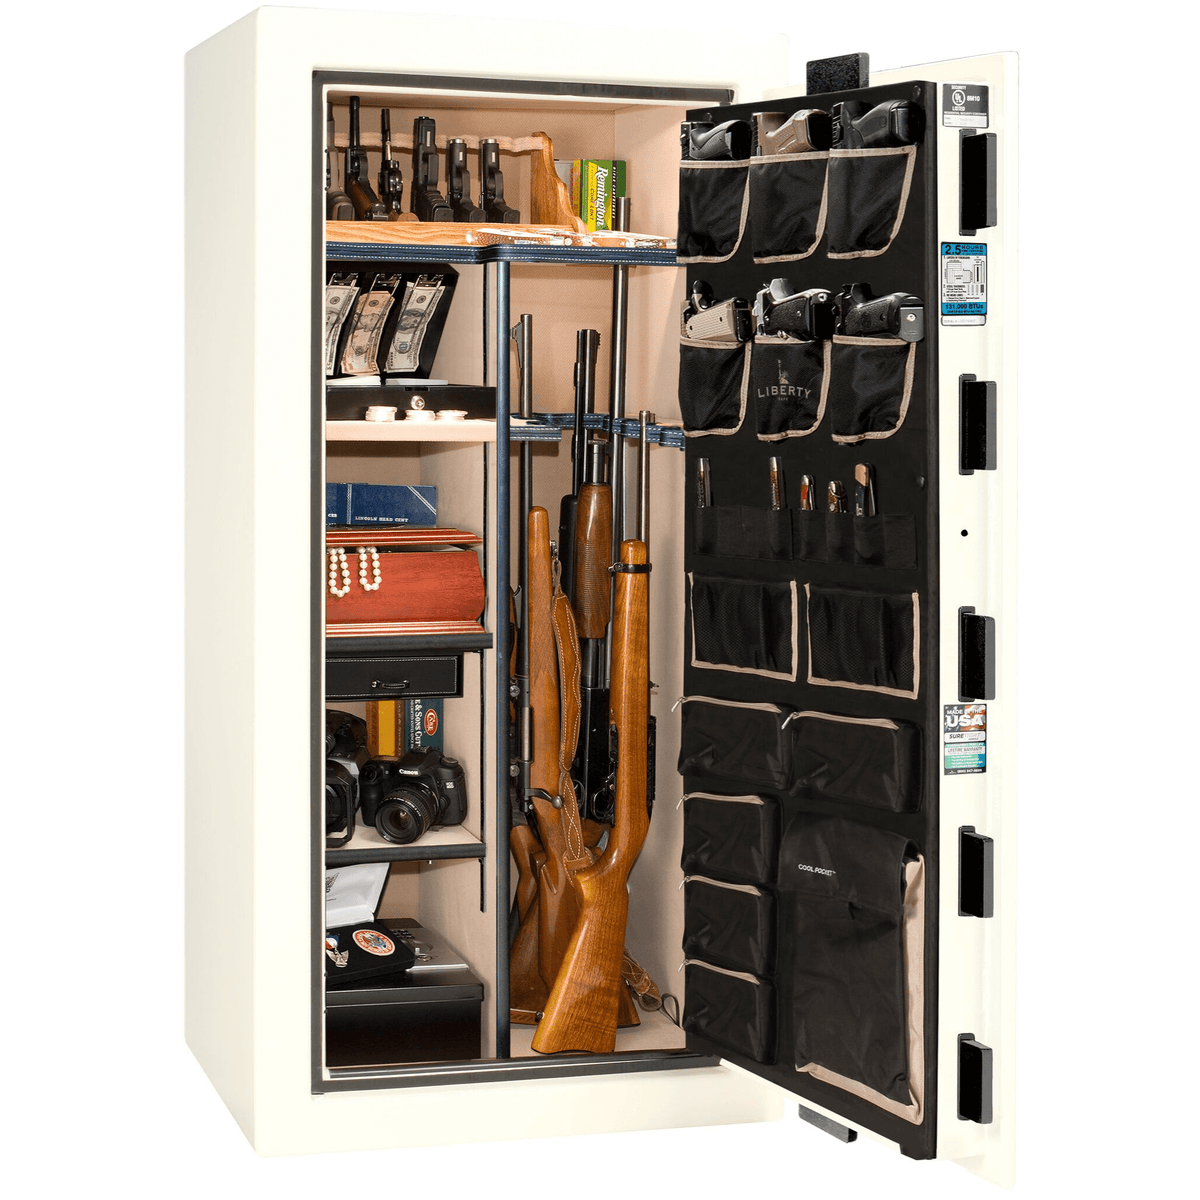 Liberty Safe National Magnum 25 in White Gloss, open door.